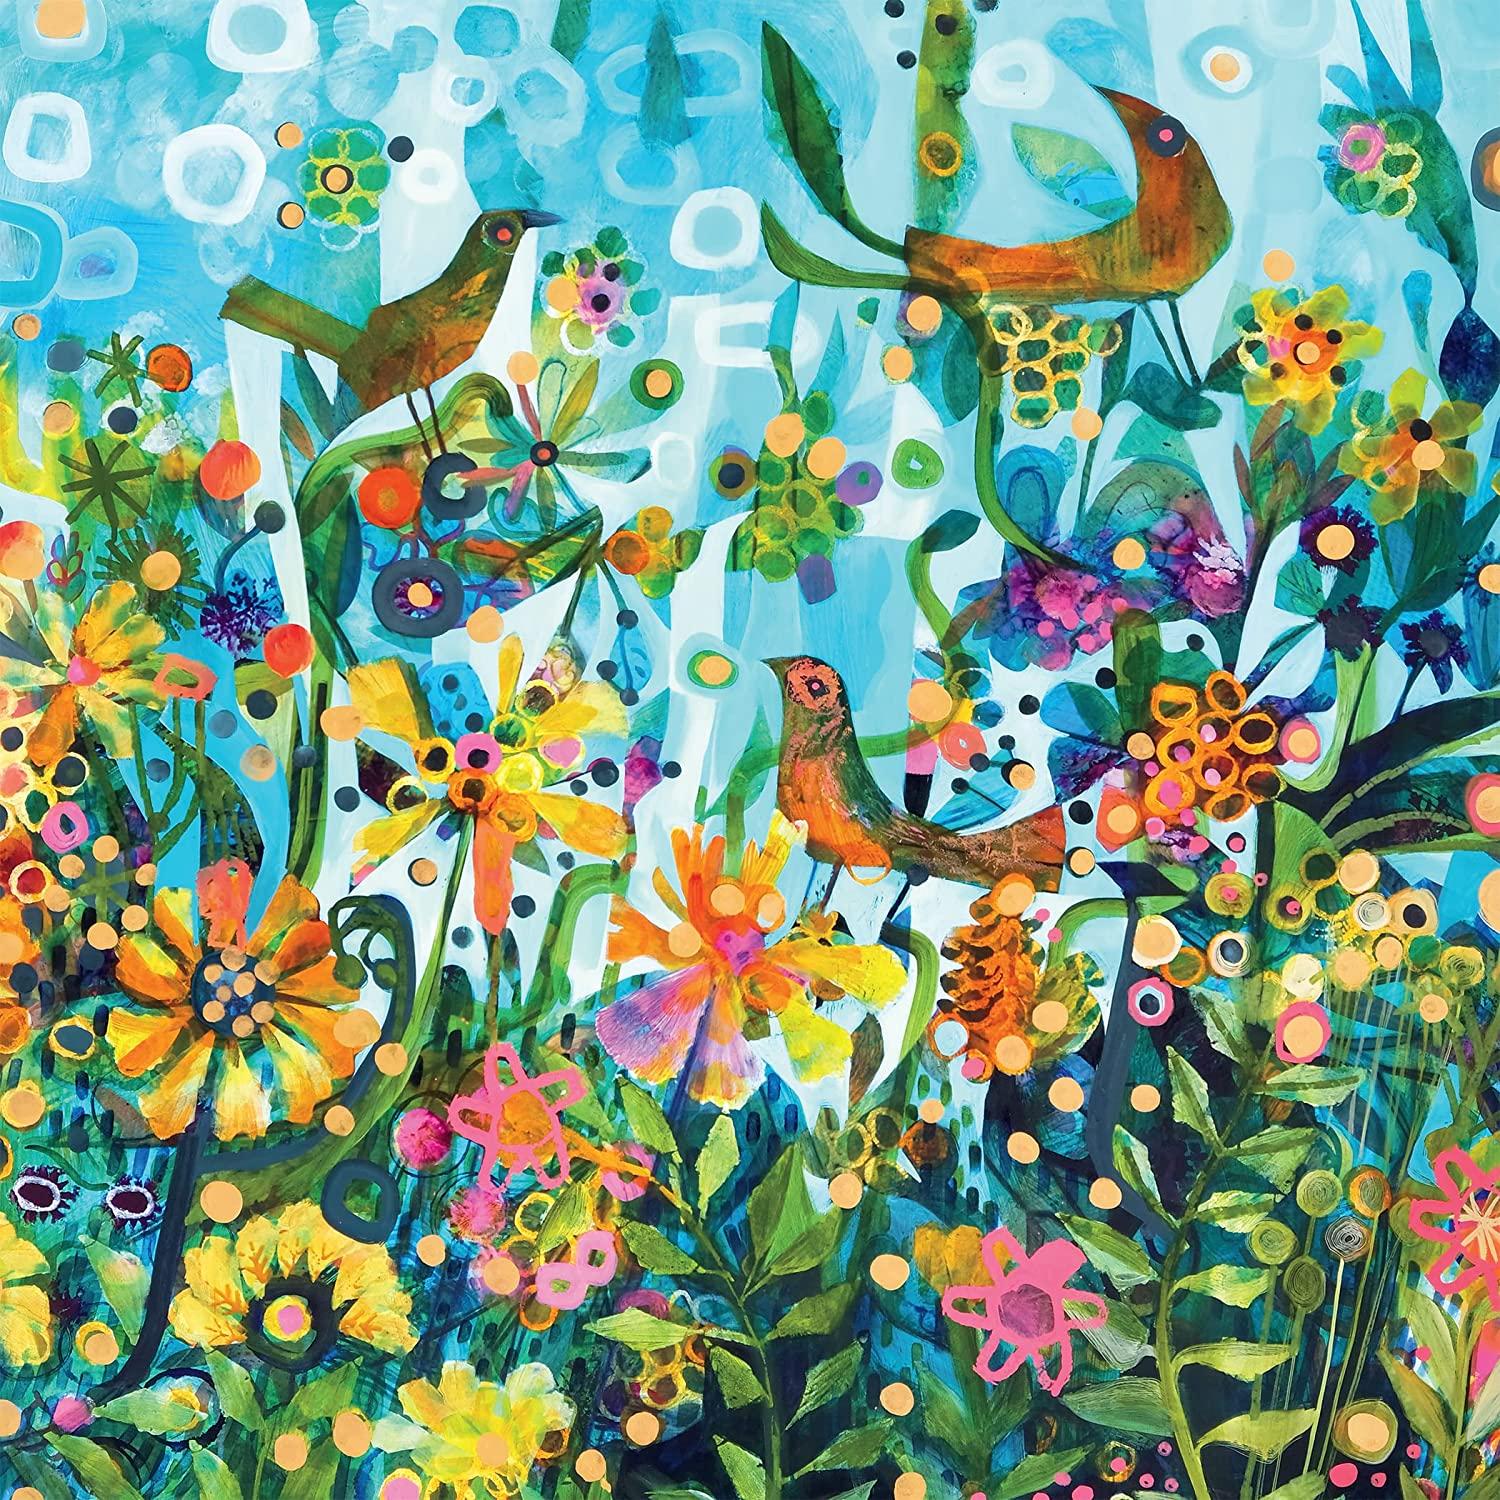 This colorful 300 oversized piece puzzle features a bold painting by, Este Macleod, of birds and flowers creating a vibrant pattern.